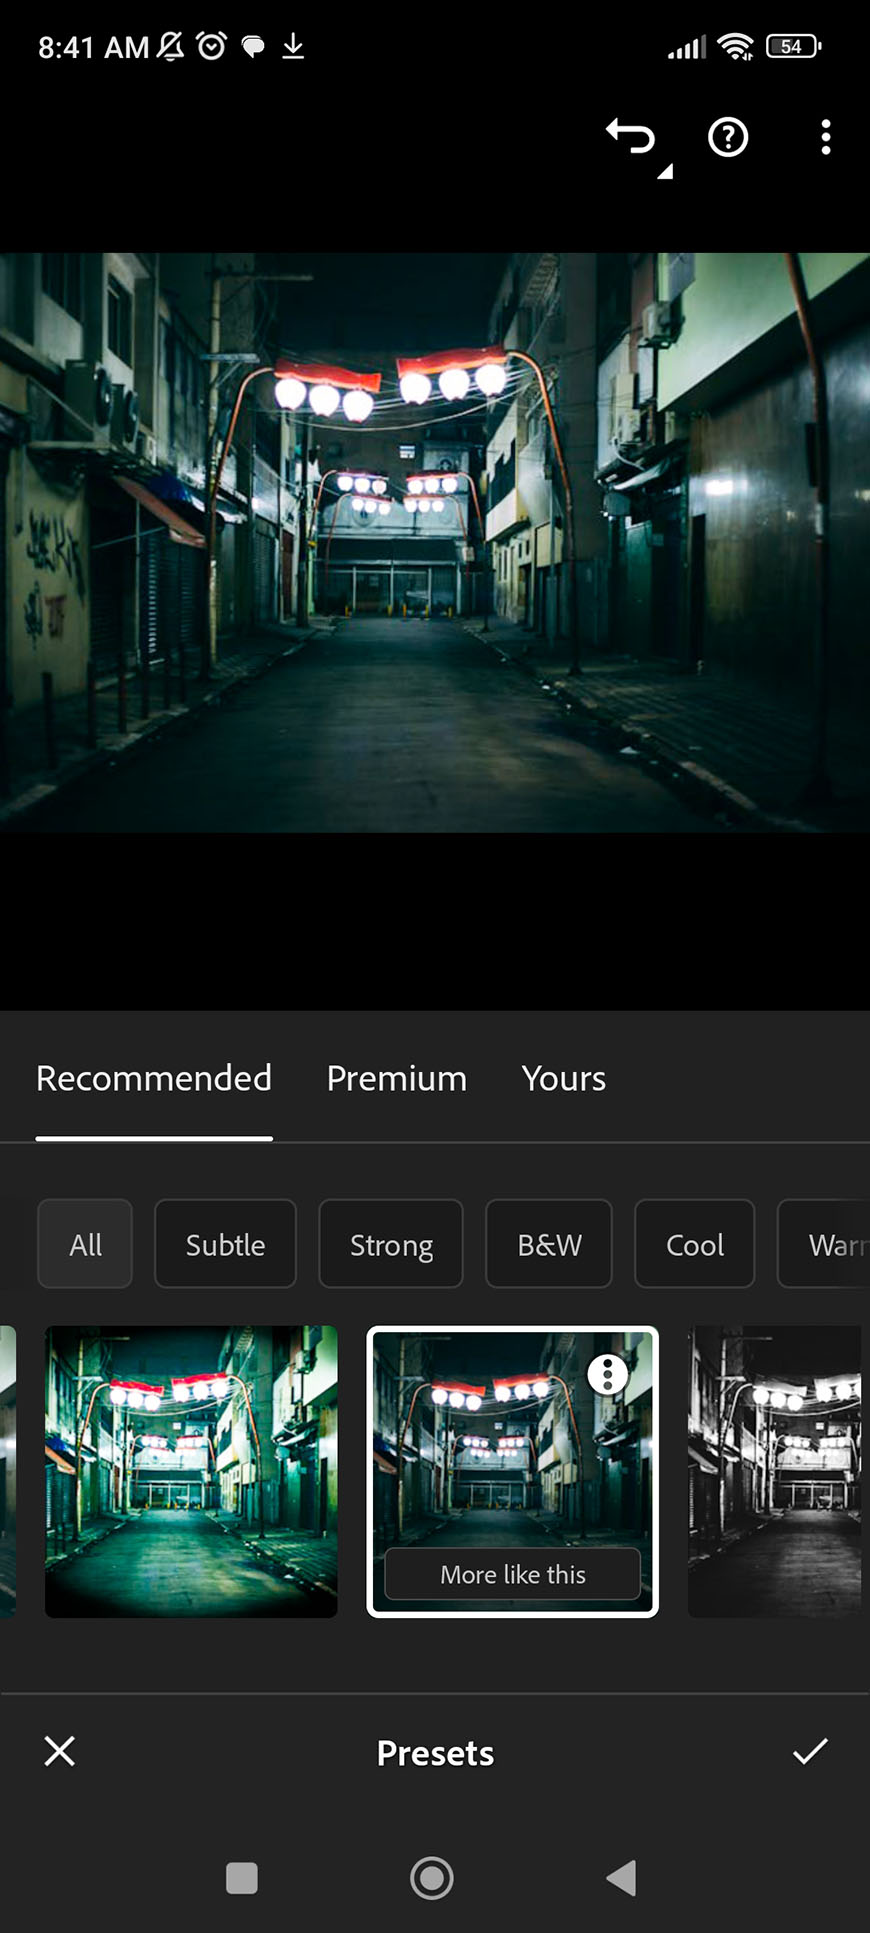 A mobile screen displaying a photo editing app with various filter options, using an image of an urban alleyway as the subject.